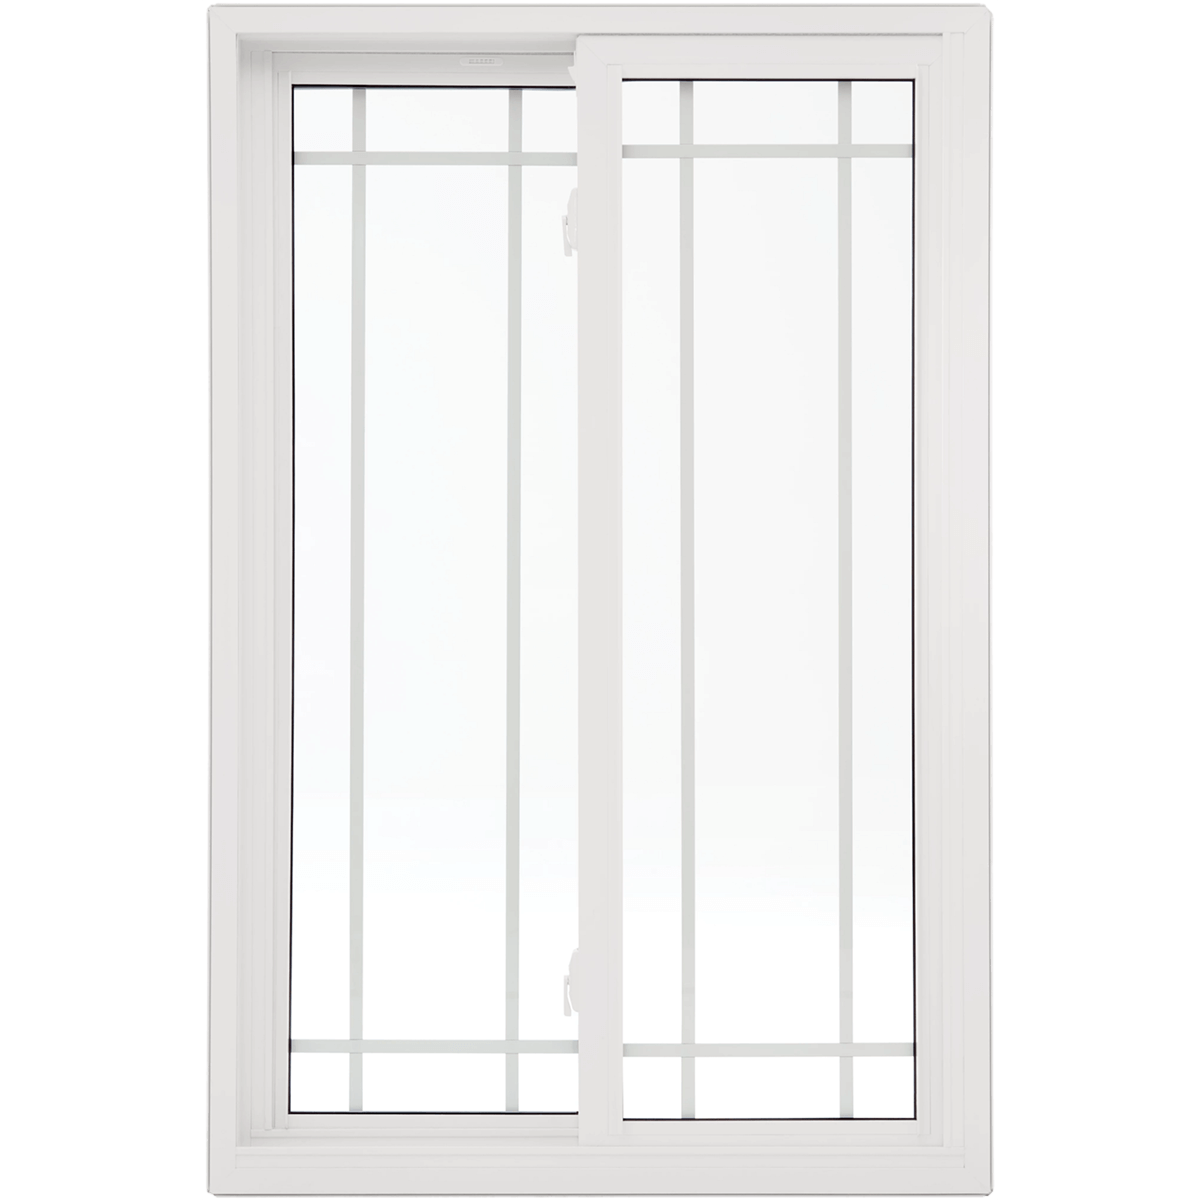 Single and double slider windows feature one or two sashes that slide horizontally to provide ventilation and easy operation.